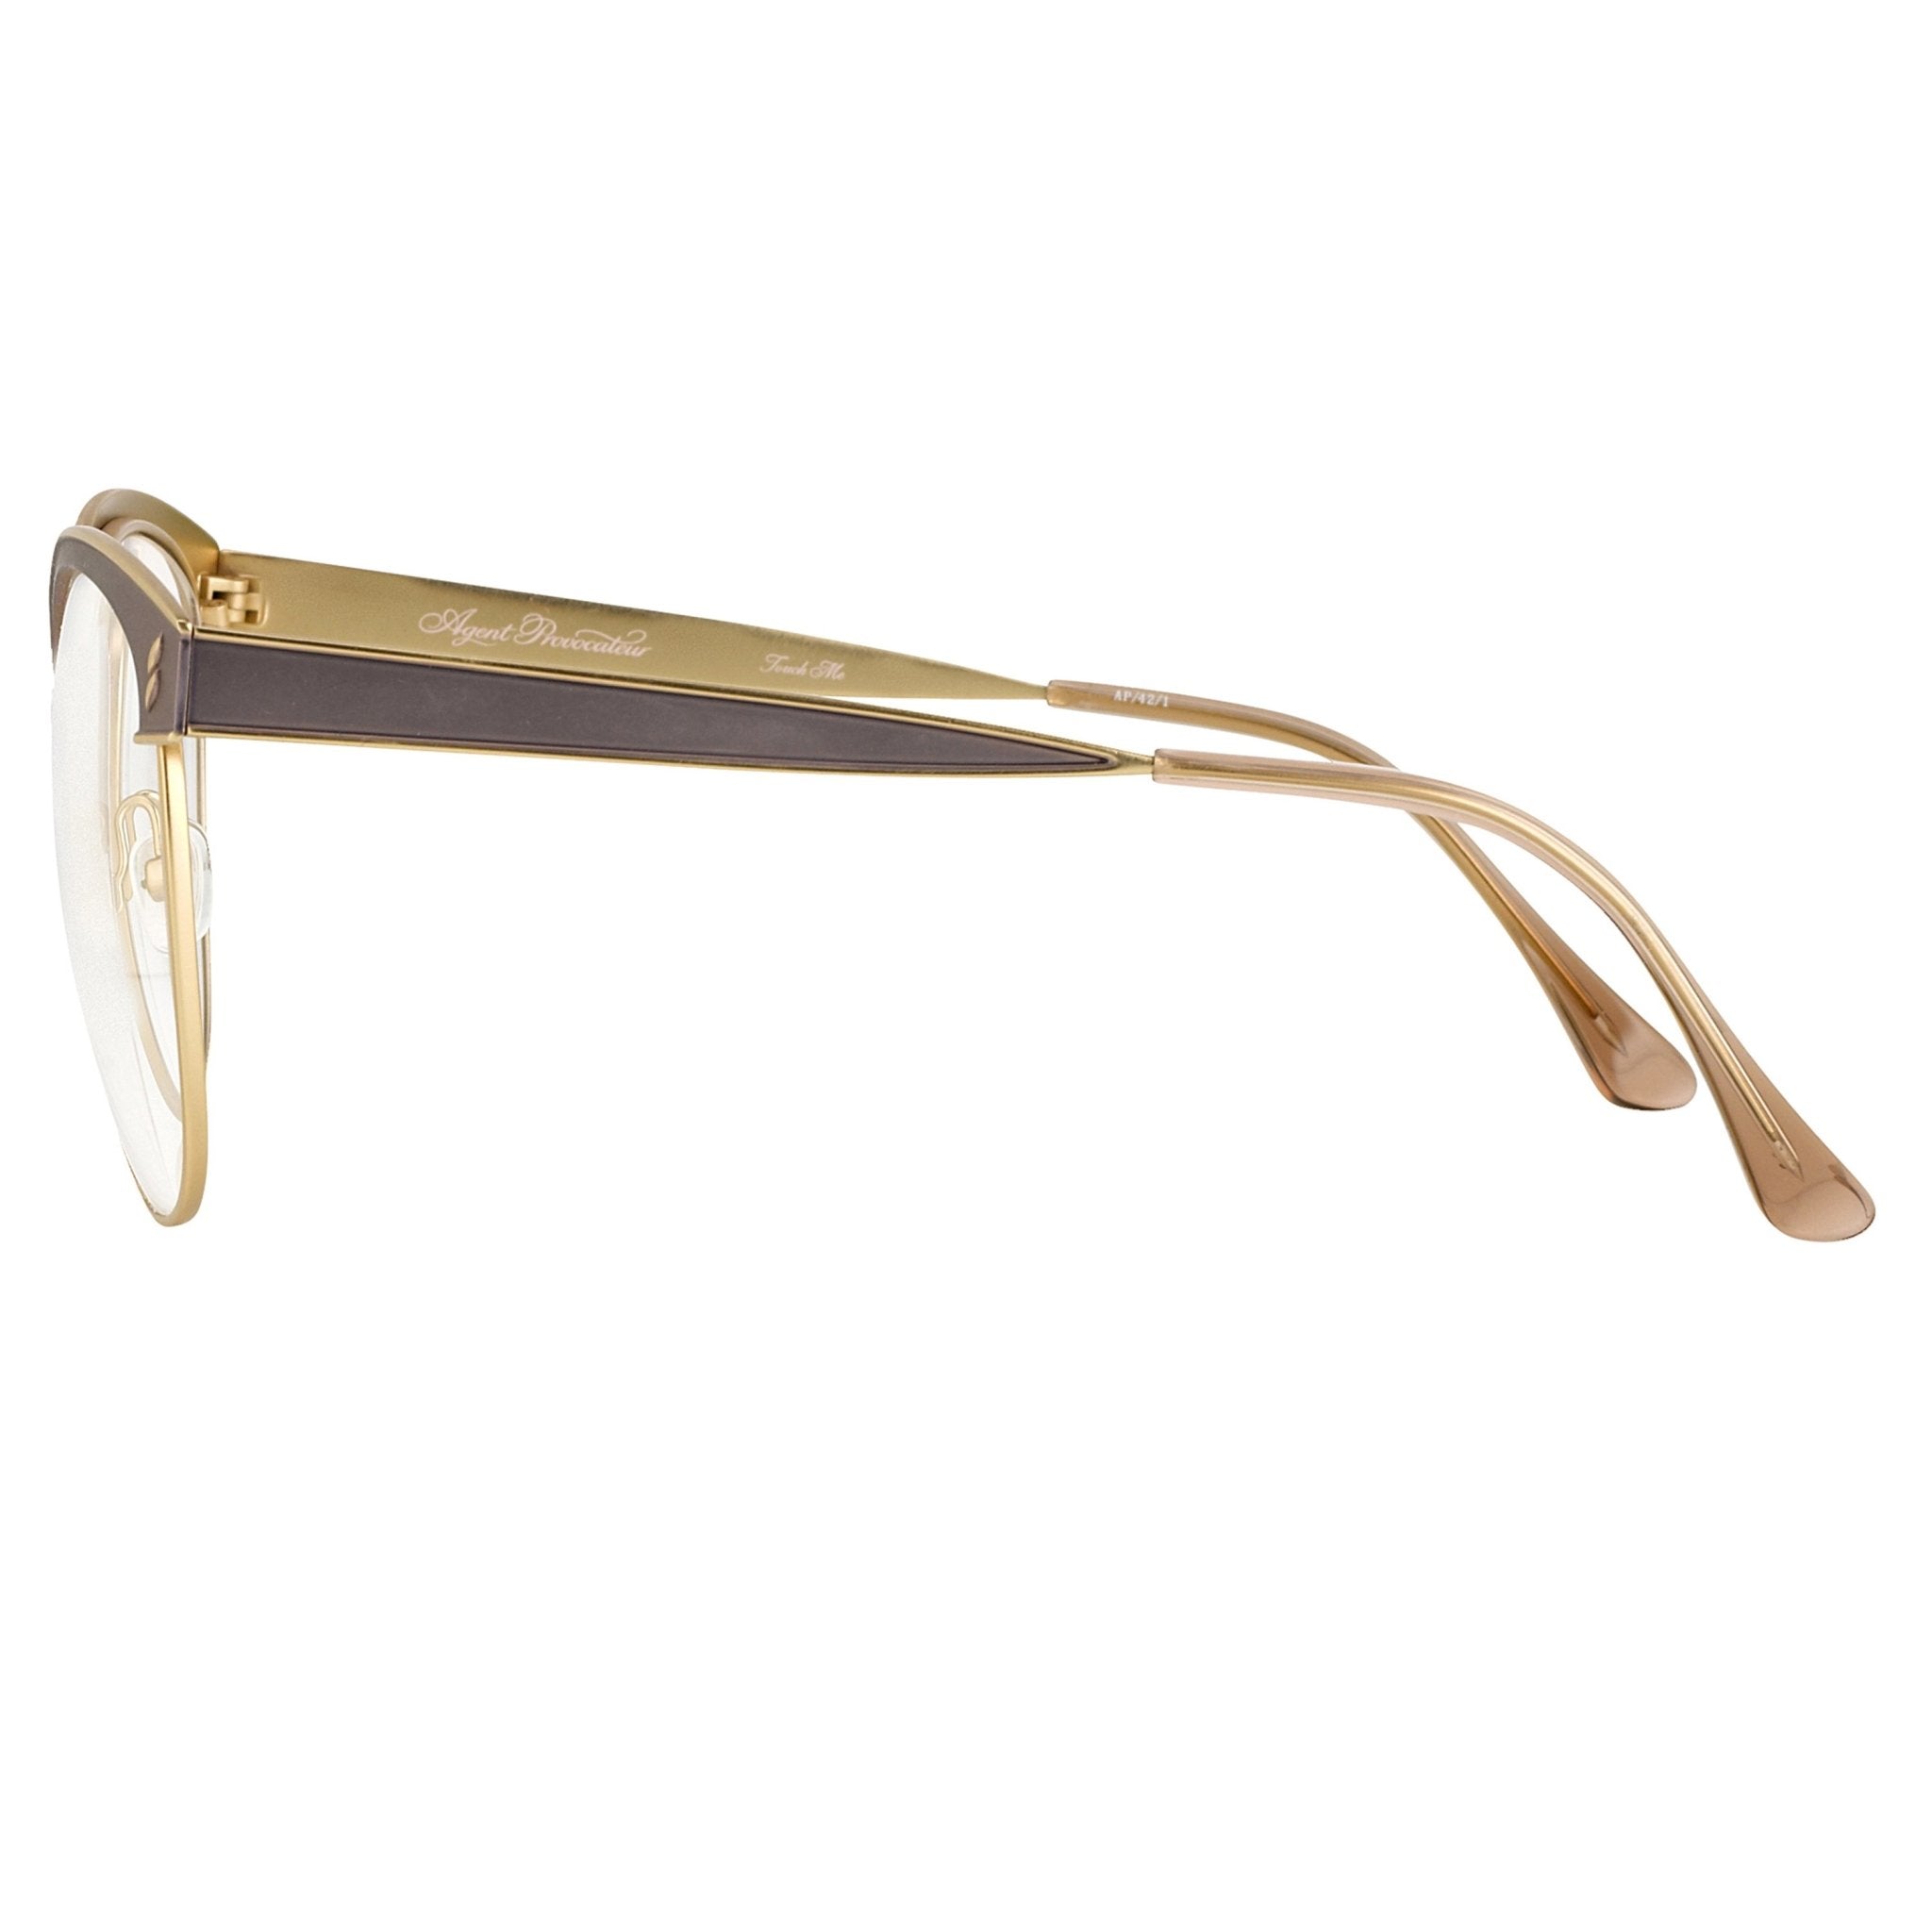 Agent Provocateur Eyeglasses Oval Brown/Gold - Watches & Crystals